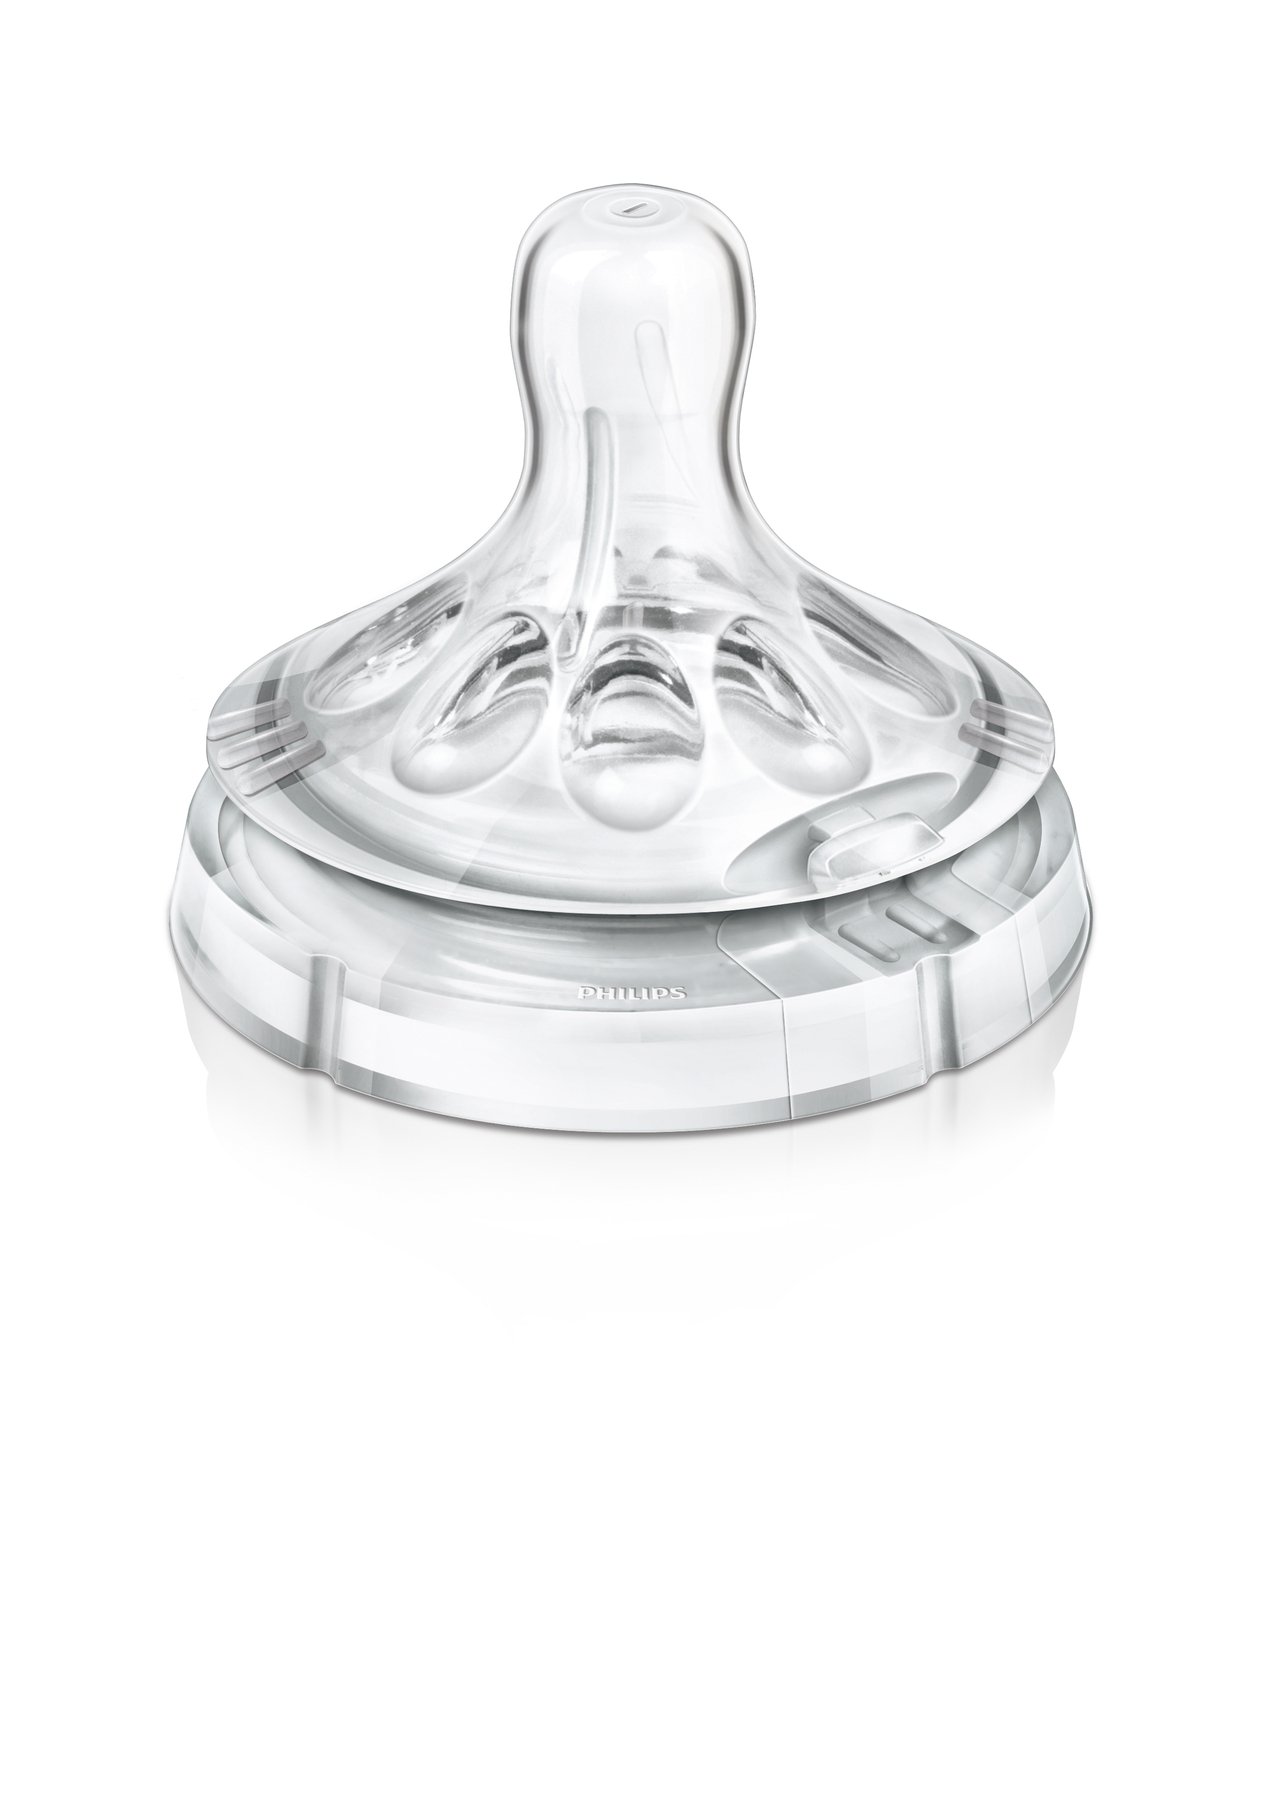 Philips Avent Variable Flow Natural Nipple, 2-Count